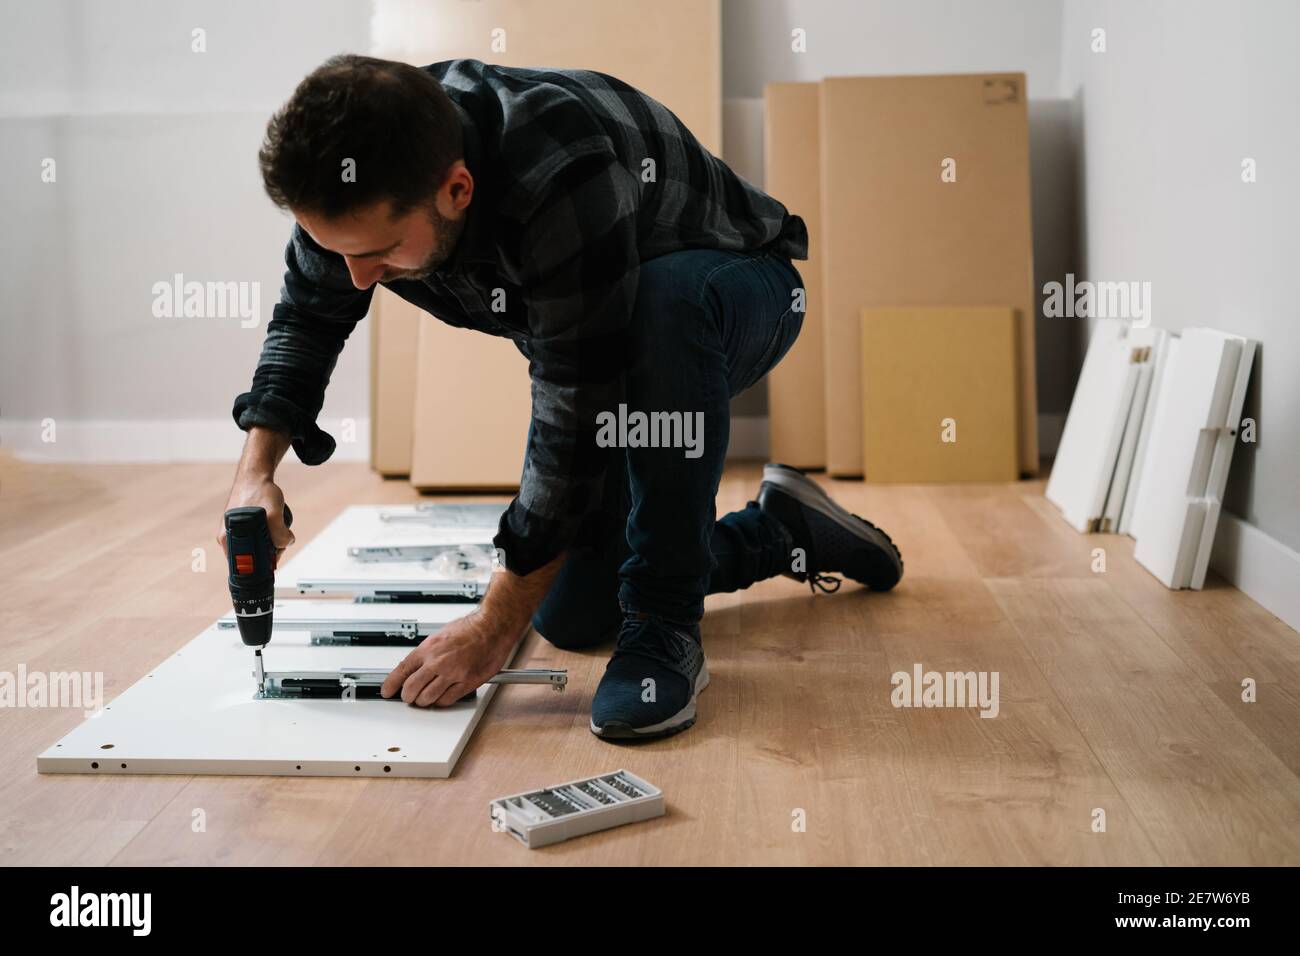 Portrait of man assembling furniture. Do it yourself furniture assembly. Stock Photo